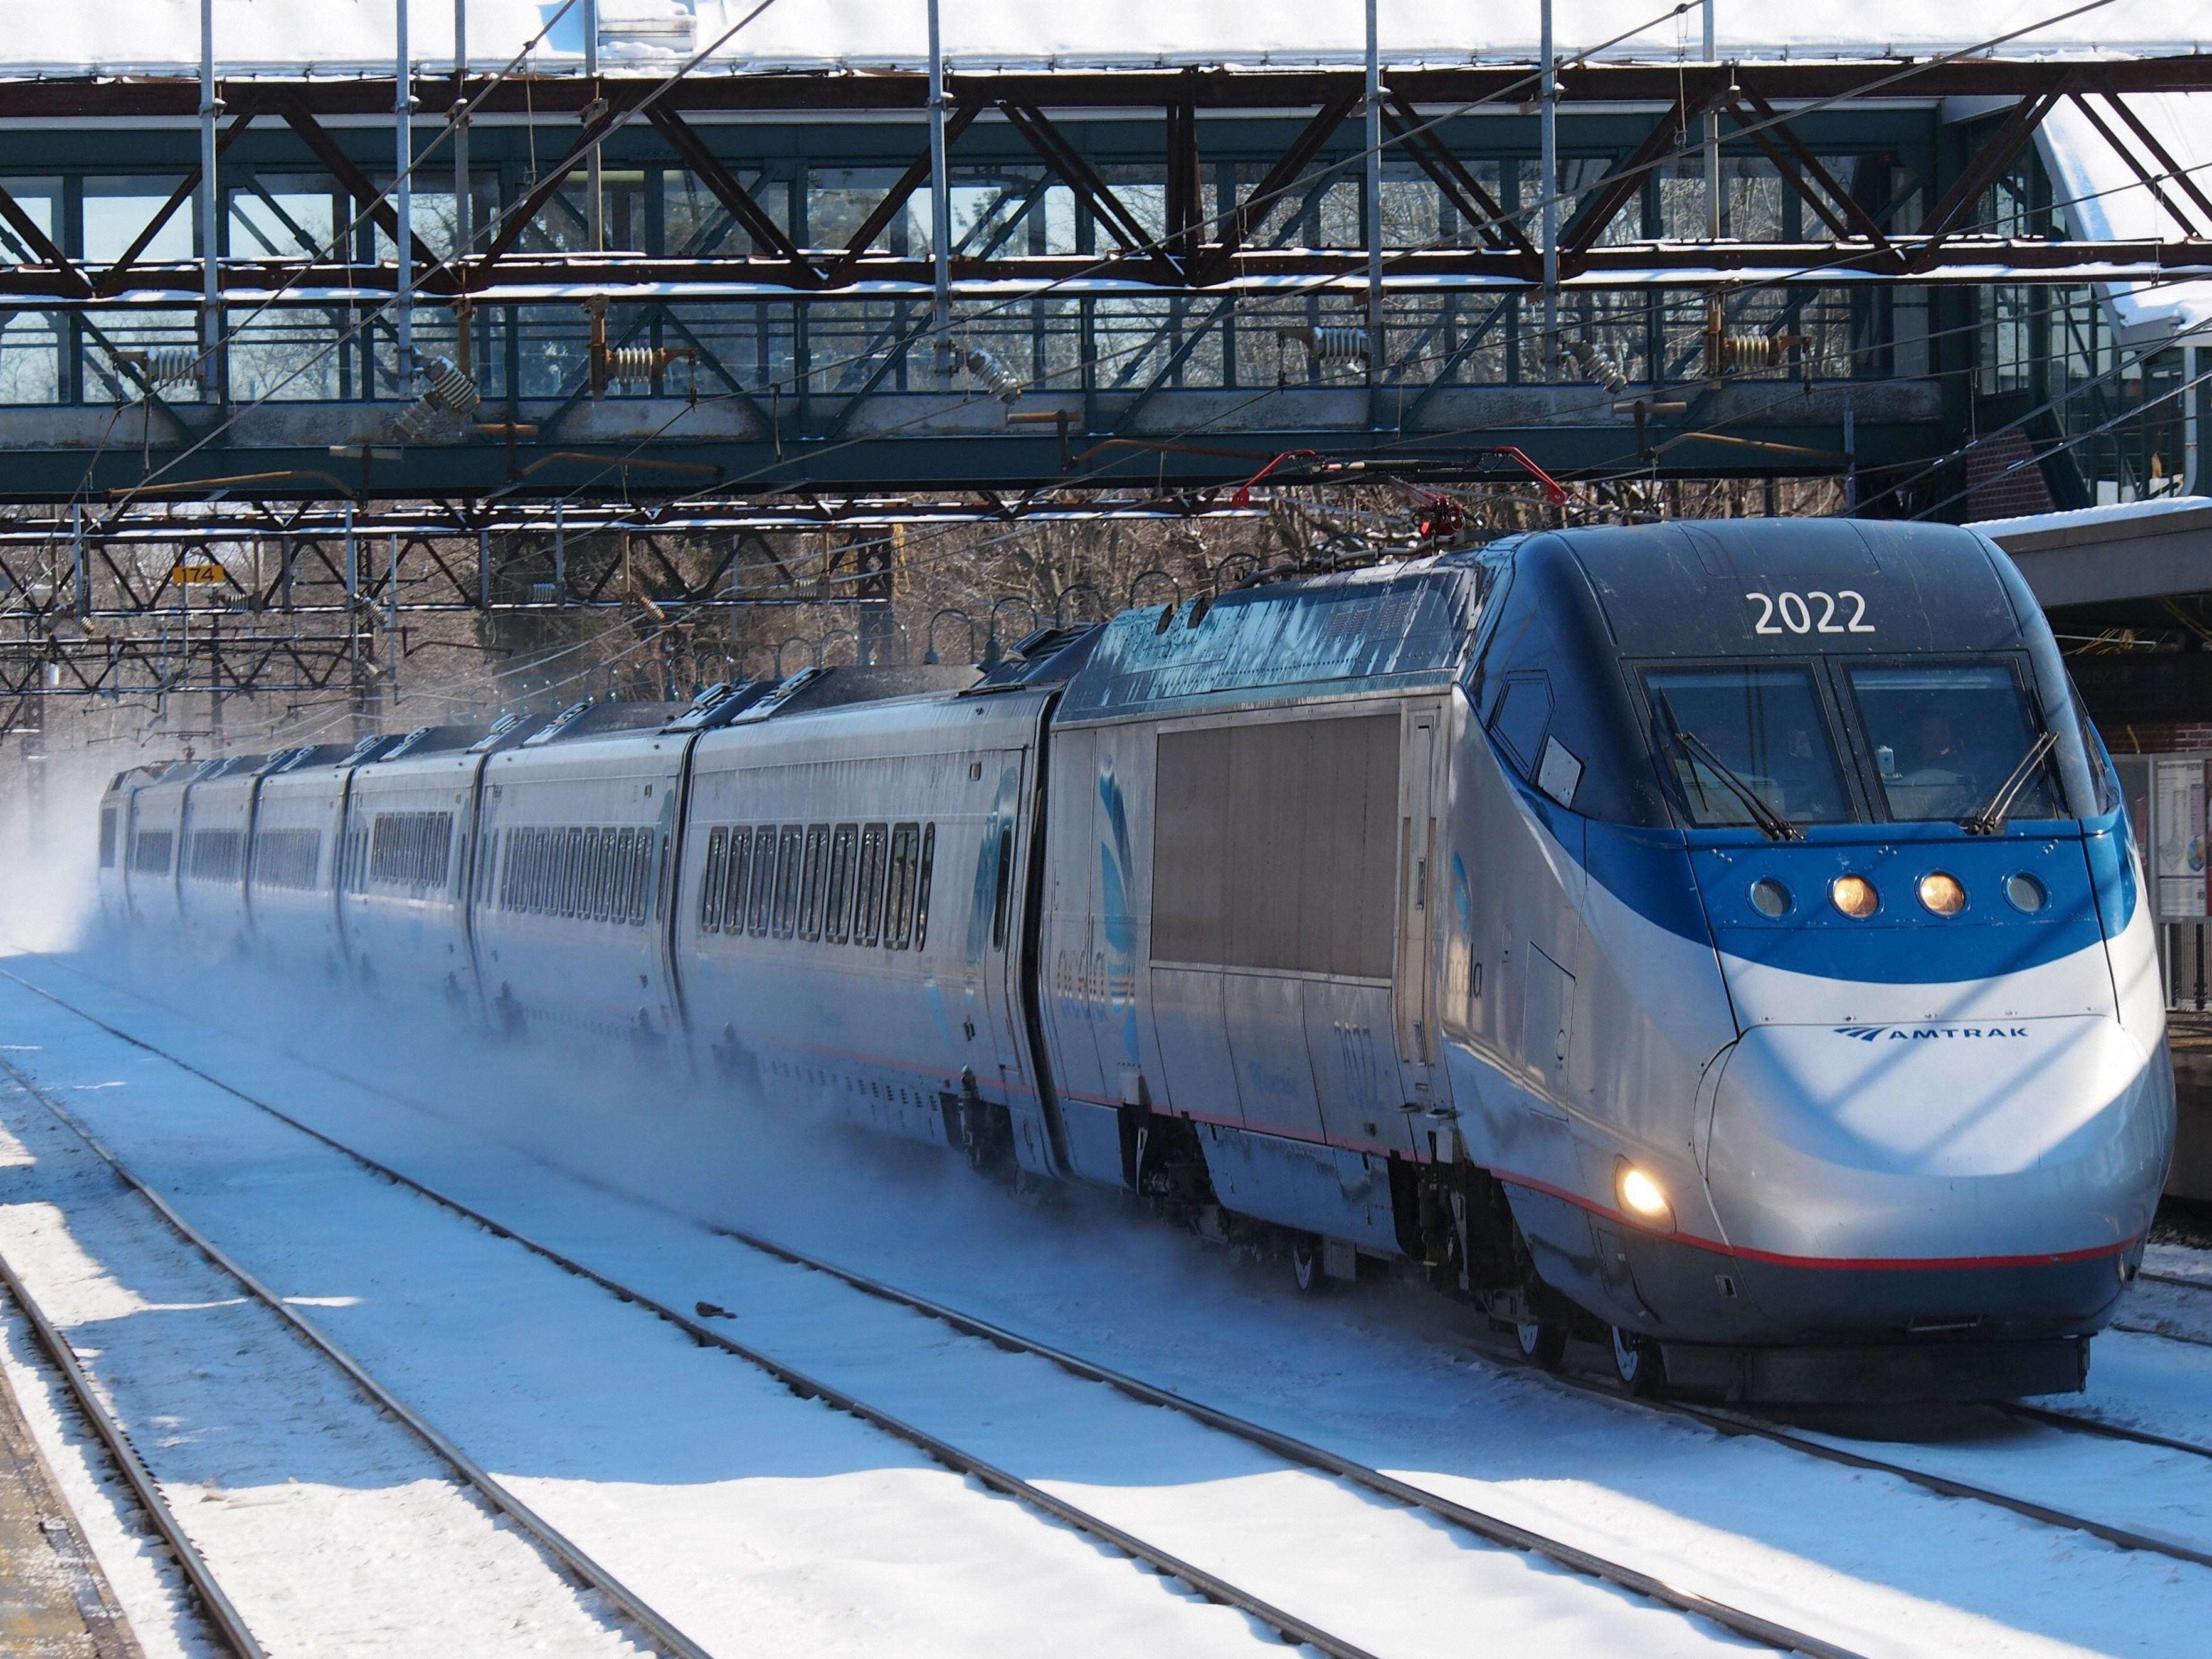 Amtraks-80-billion-plan-to-connect-the-US-is-the-latest-step-in-a-rail-revolution-but-has-a-glaring-omission-high-speed-rail.jpg